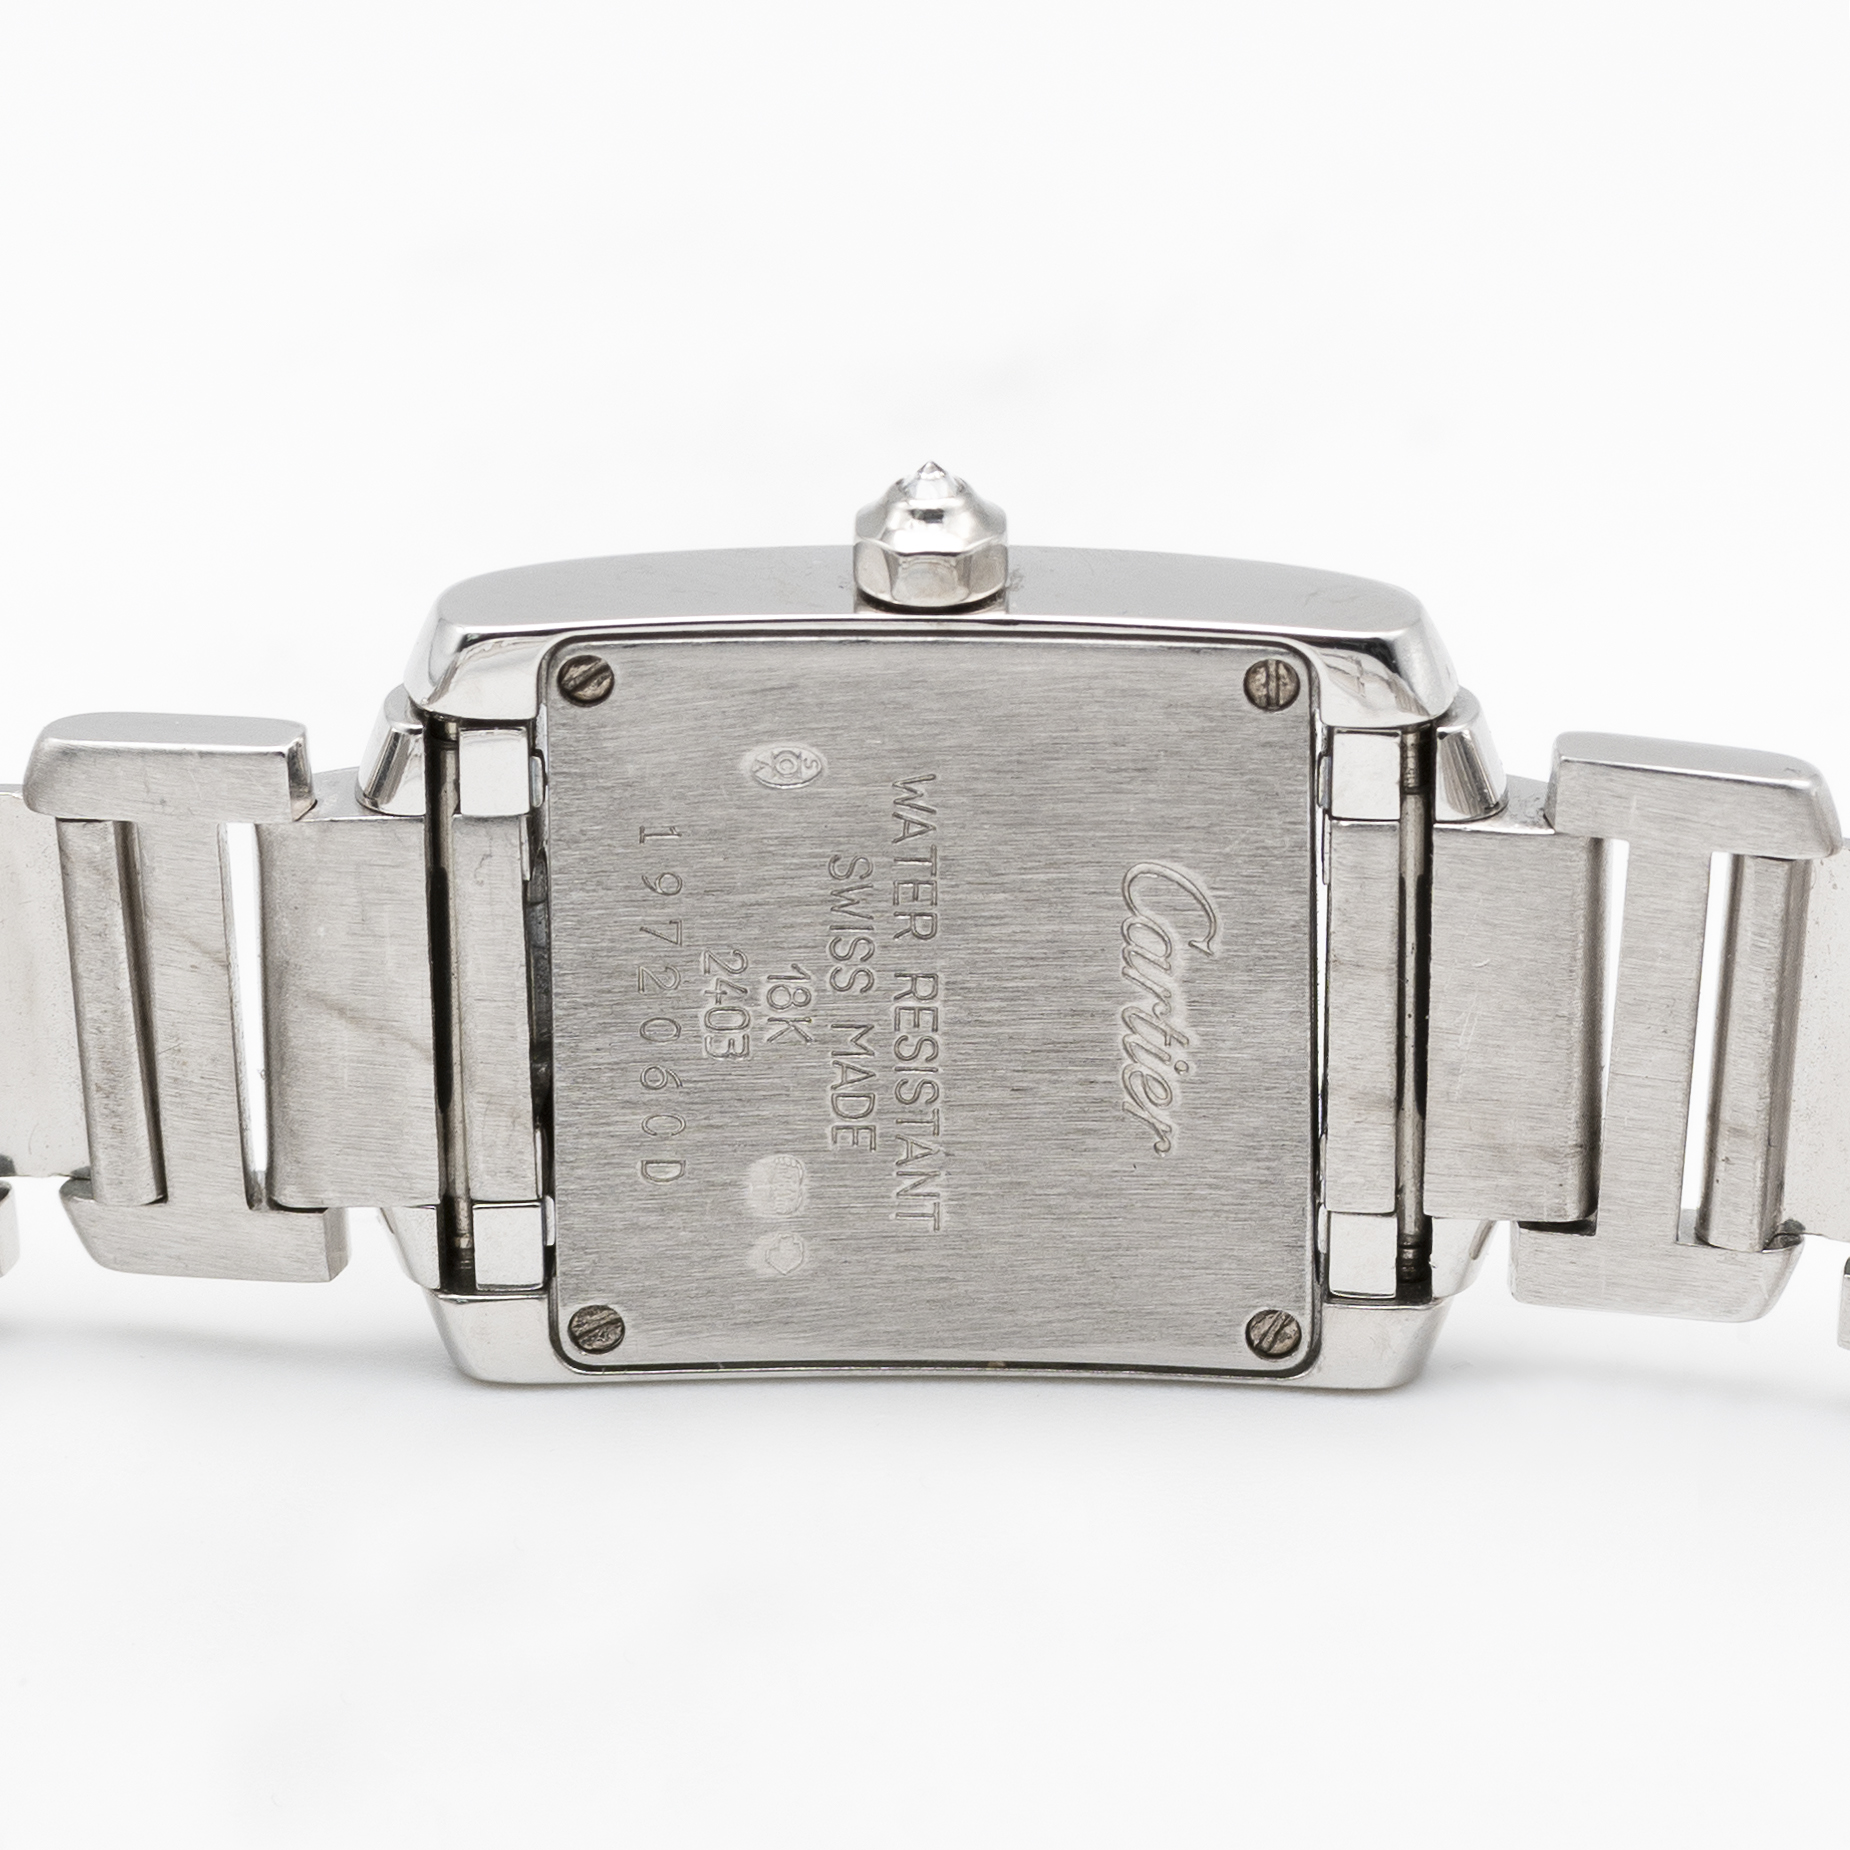 A LADIES 18K SOLID WHITE GOLD CARTIER TANK FRANCAISE BRACELET WATCH CIRCA 2005, REF. 2403 WITH AFTER - Image 6 of 9